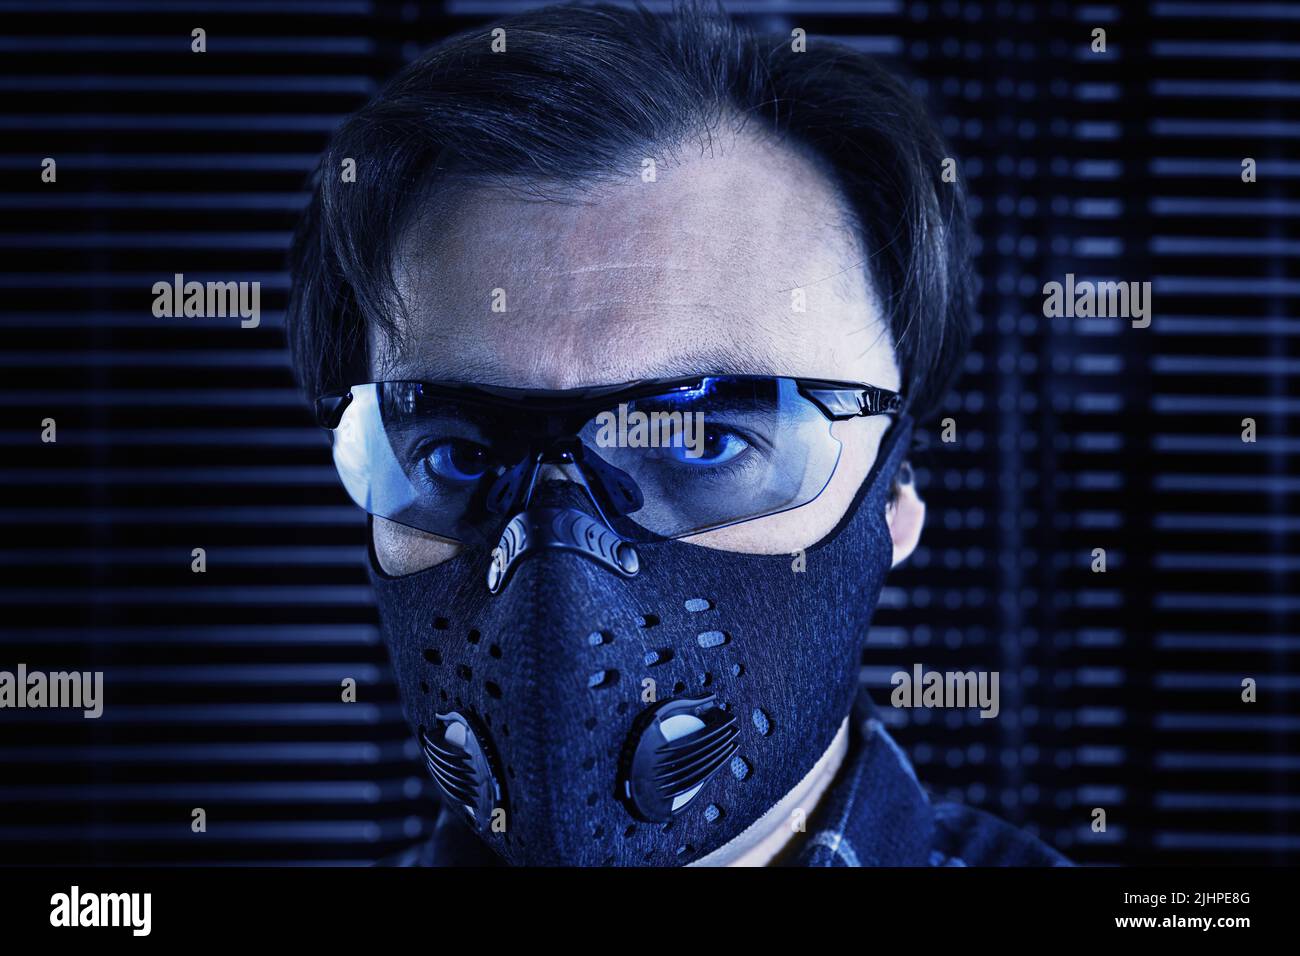 A mid age man in sunglasses and a respiratory mask on a futuristic metal background. Futuristic portrait in industrial technogenic style Stock Photo